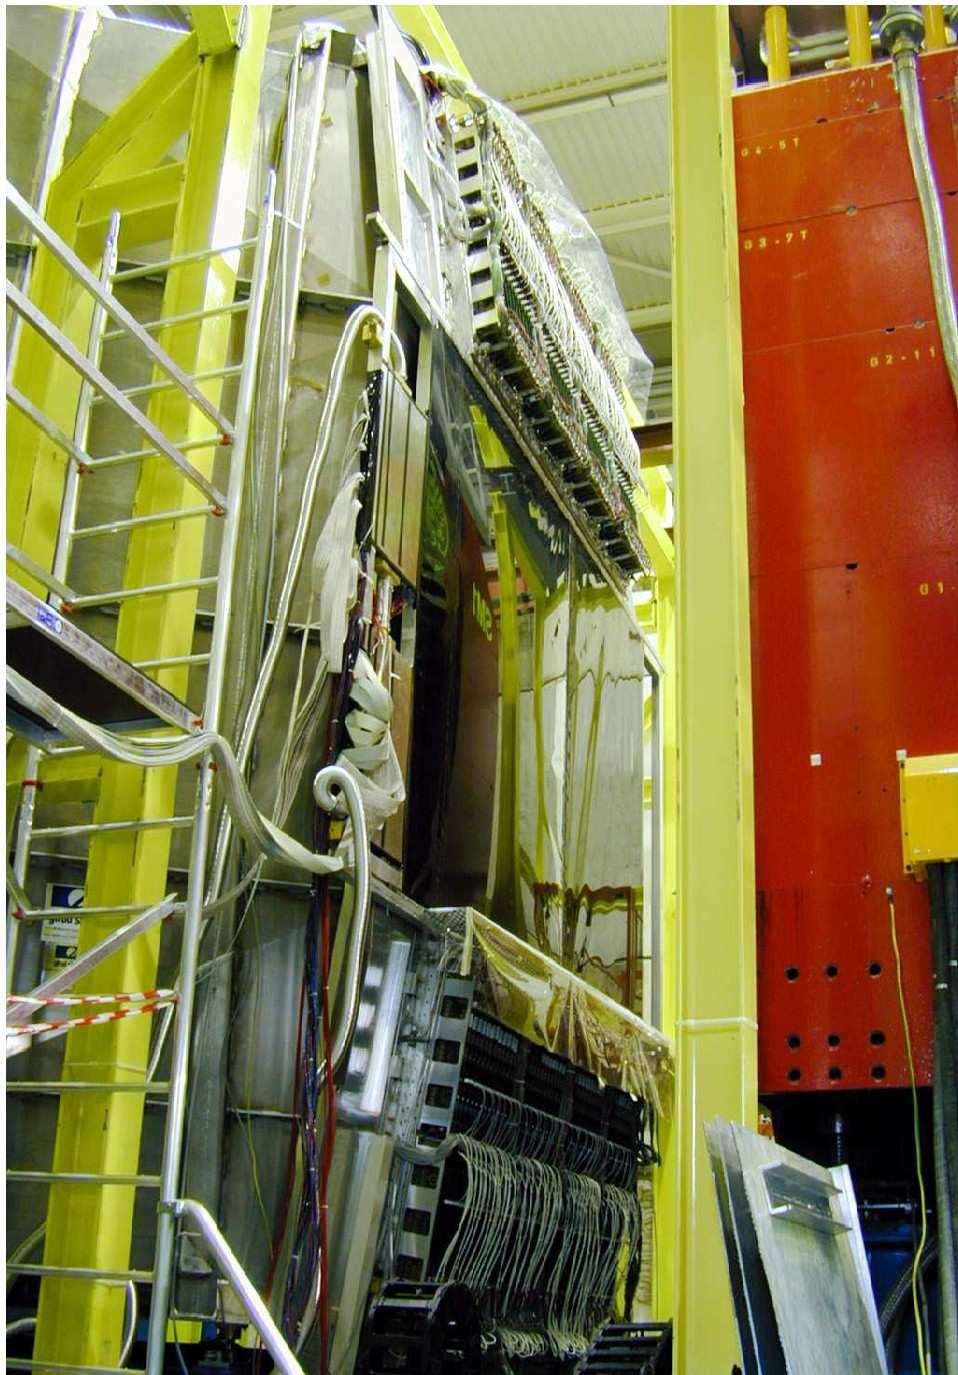 The COmmon Muon and Proton Apparatus for Structure and Spectroscopy stage spectrometer.